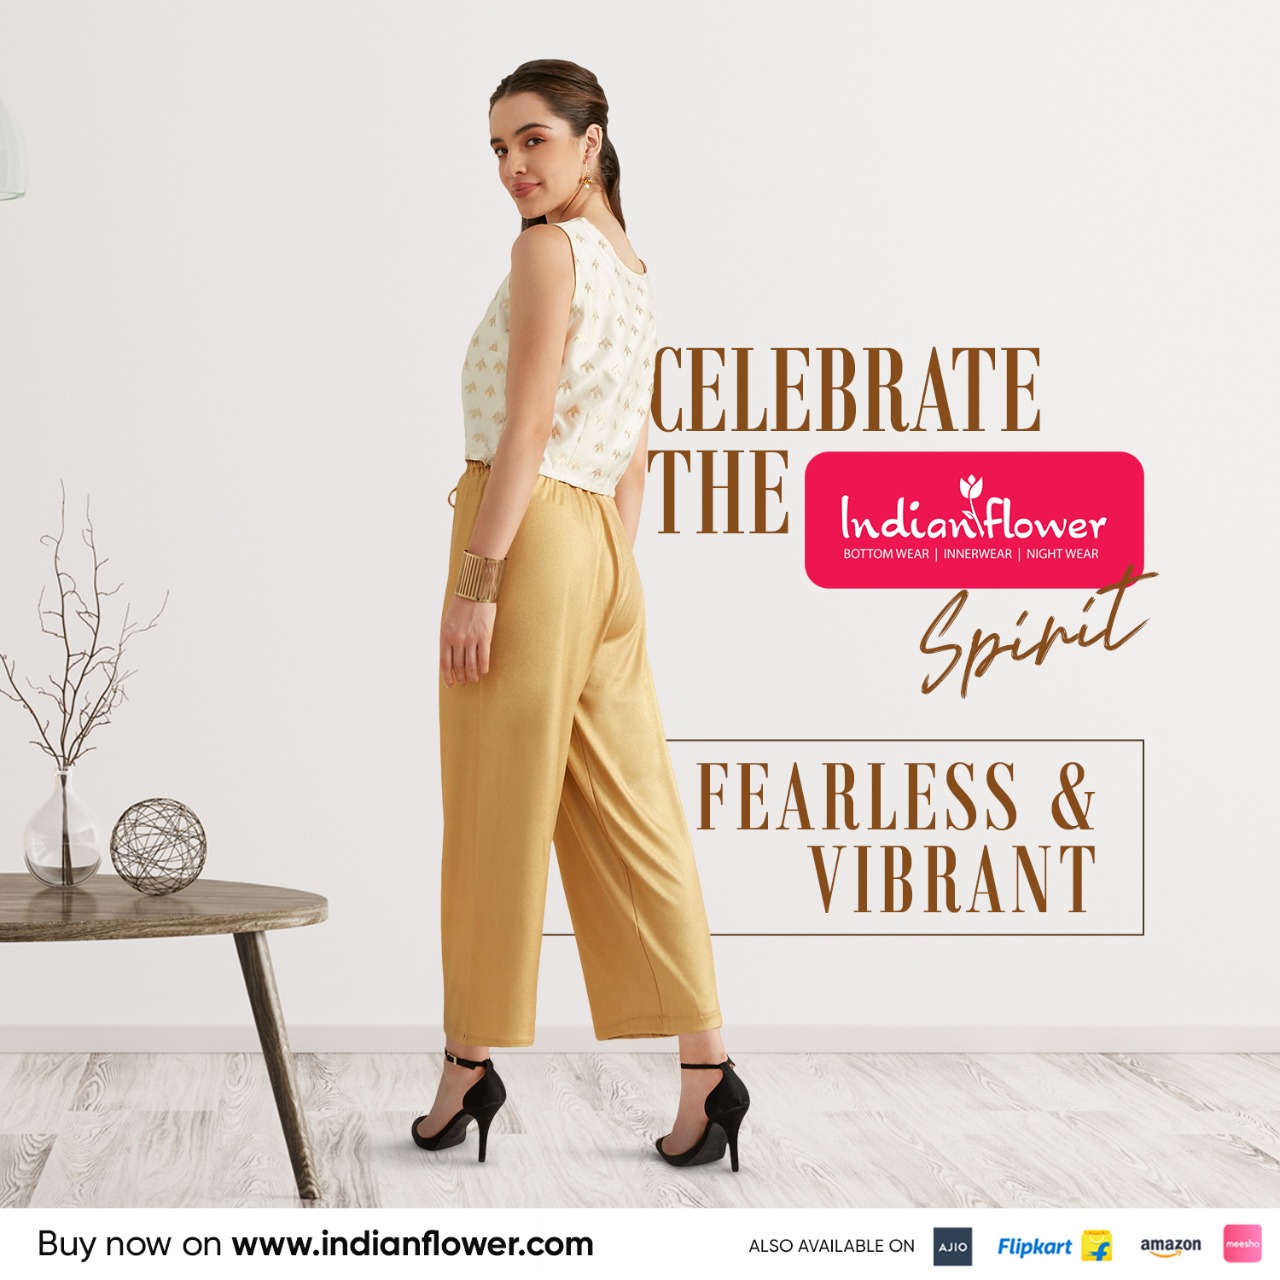 Indian Flower on X: Explore our widest range of leggings made of soft  viscose. You will conquer the world in our comfortable leggings. To order,  visit our website :  #IndianFlower #ChooseComfort #